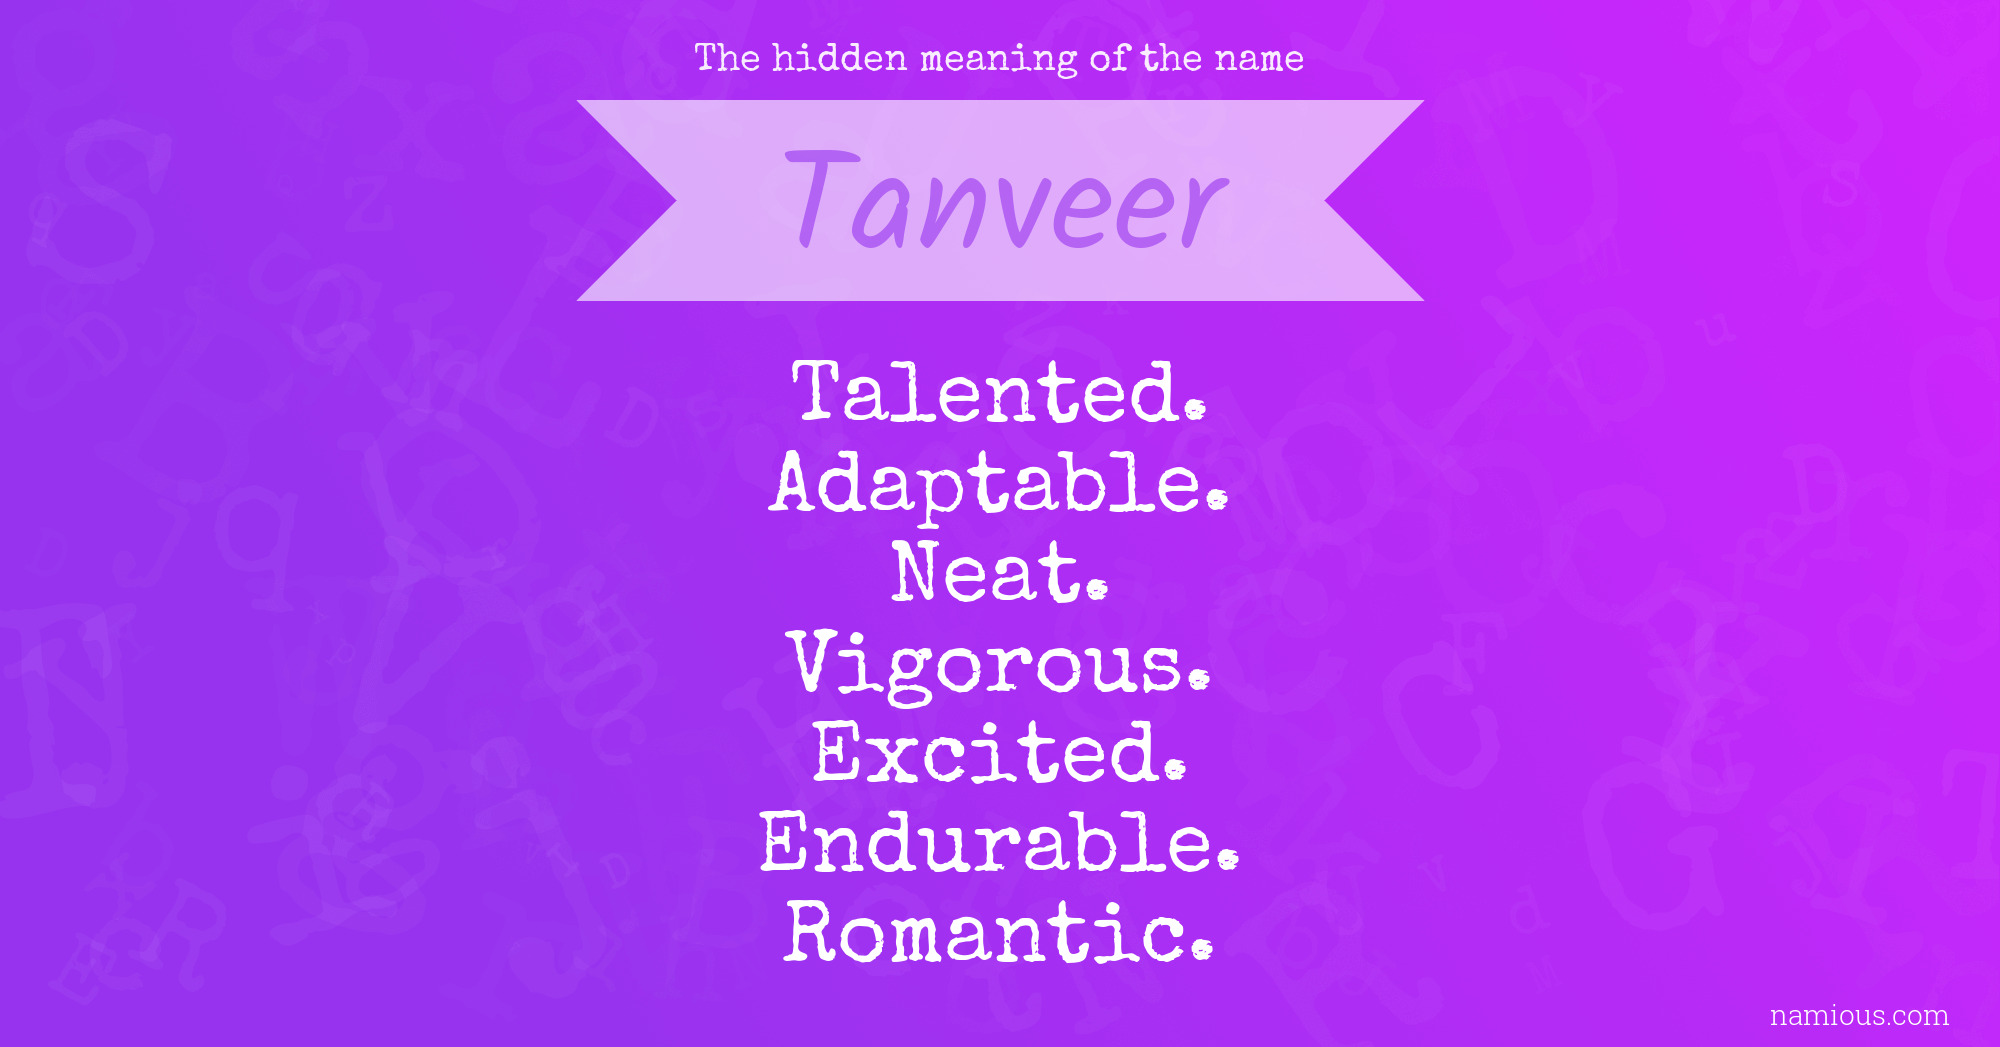 The hidden meaning of the name Tanveer